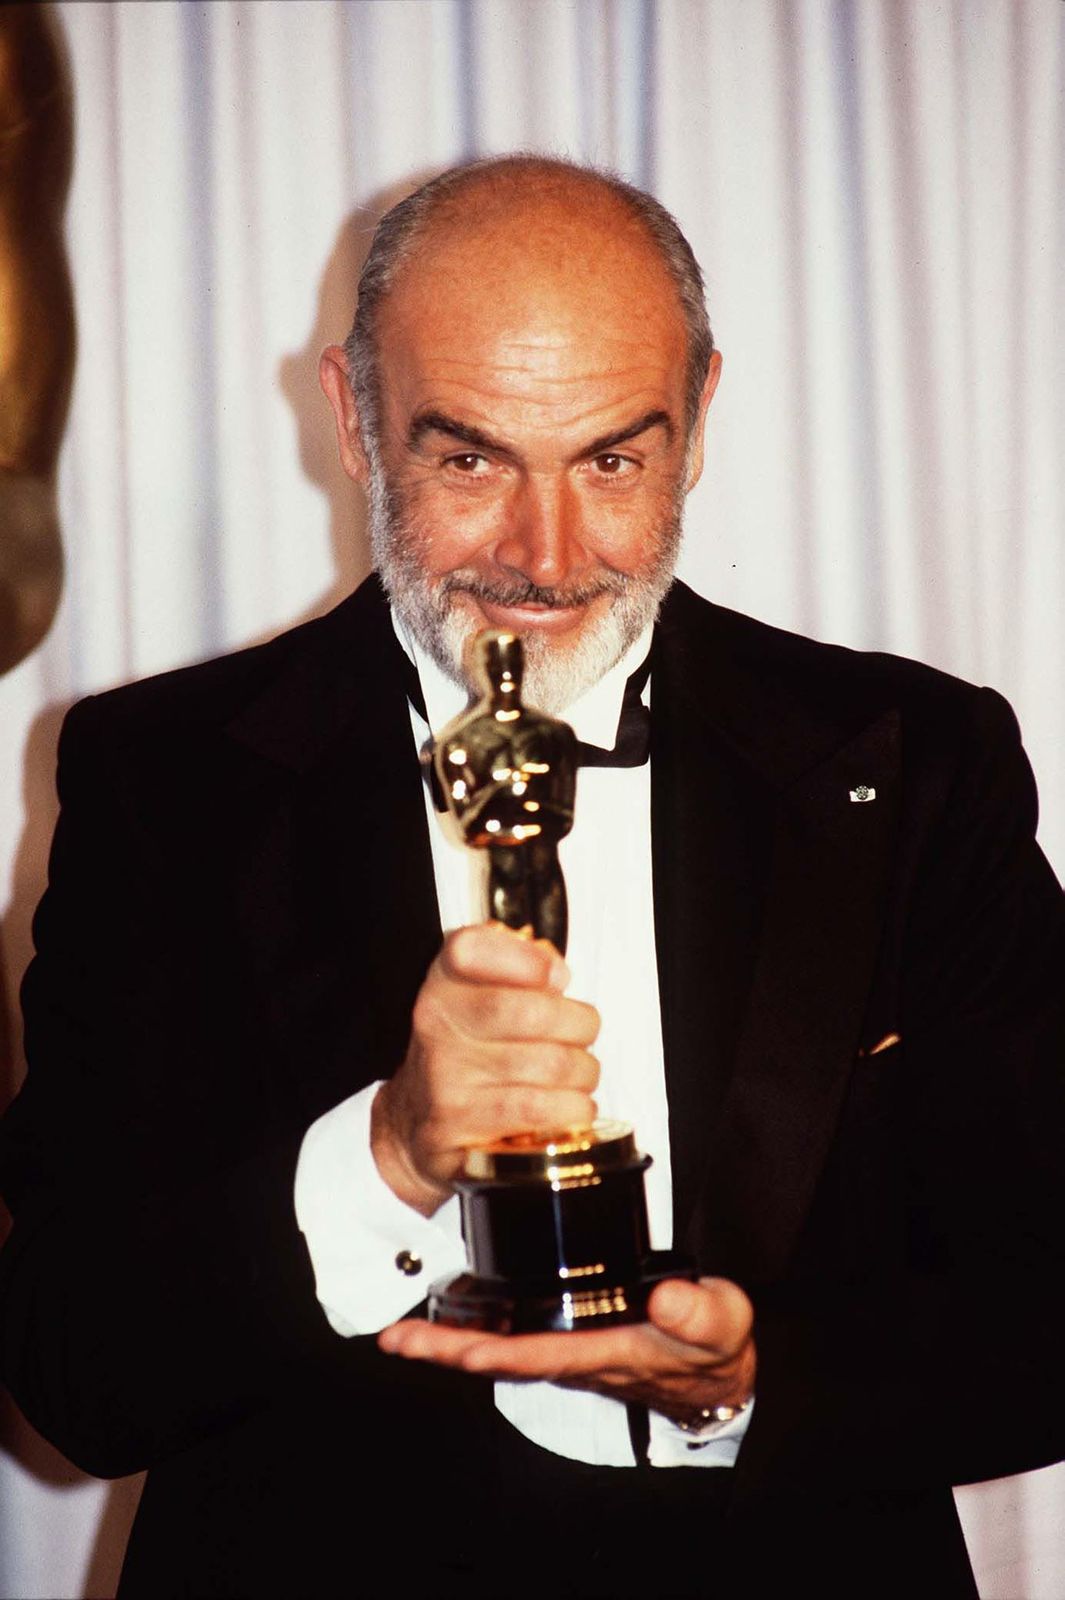 Sean Connery at an Oscar Award Ceremony on April 13, 1988 | Photo: Photoshot/Getty Images